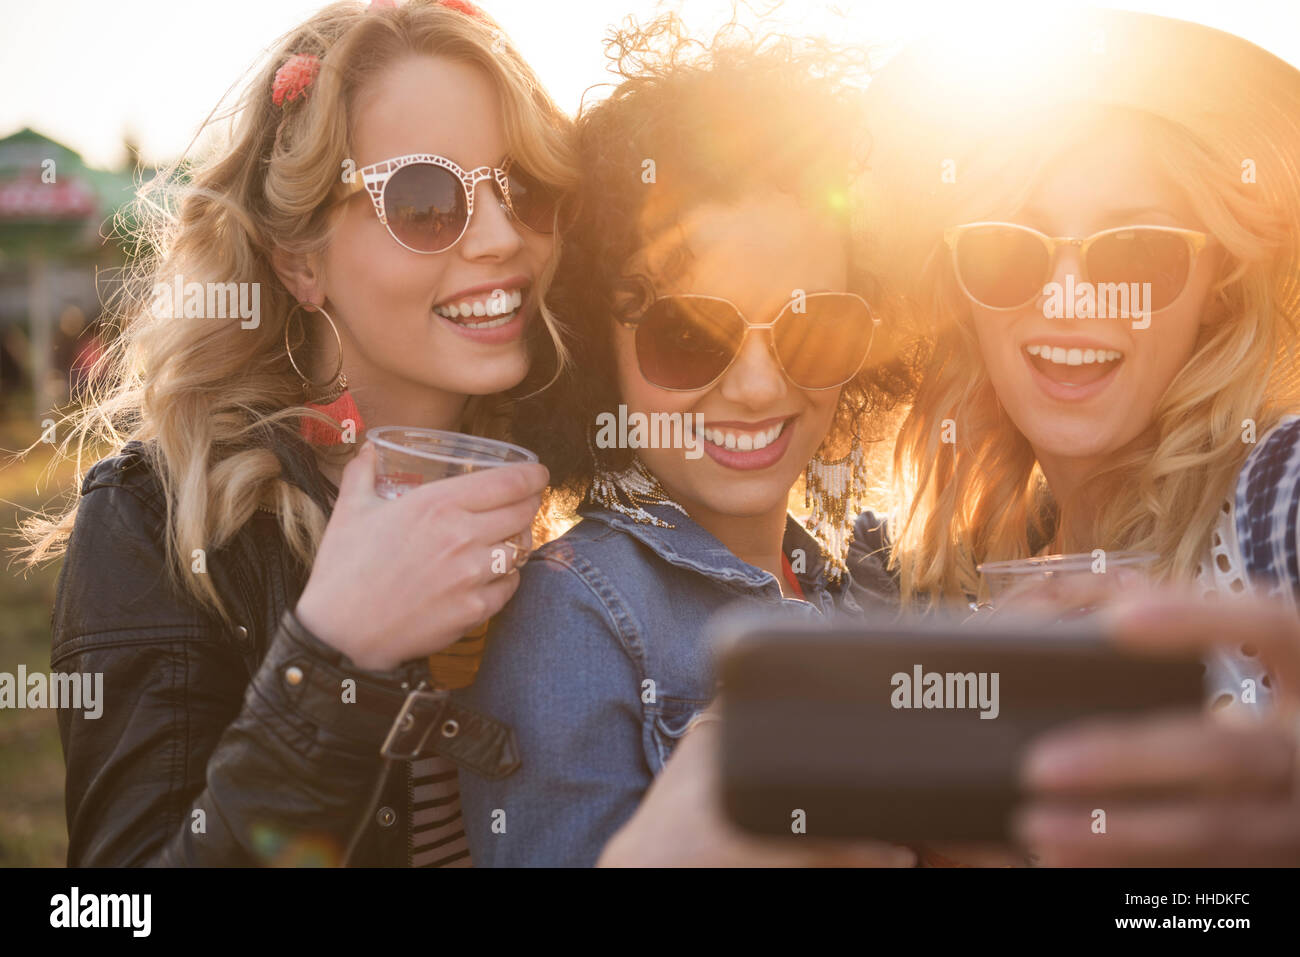 Taking many selfies with mobile phone Stock Photo